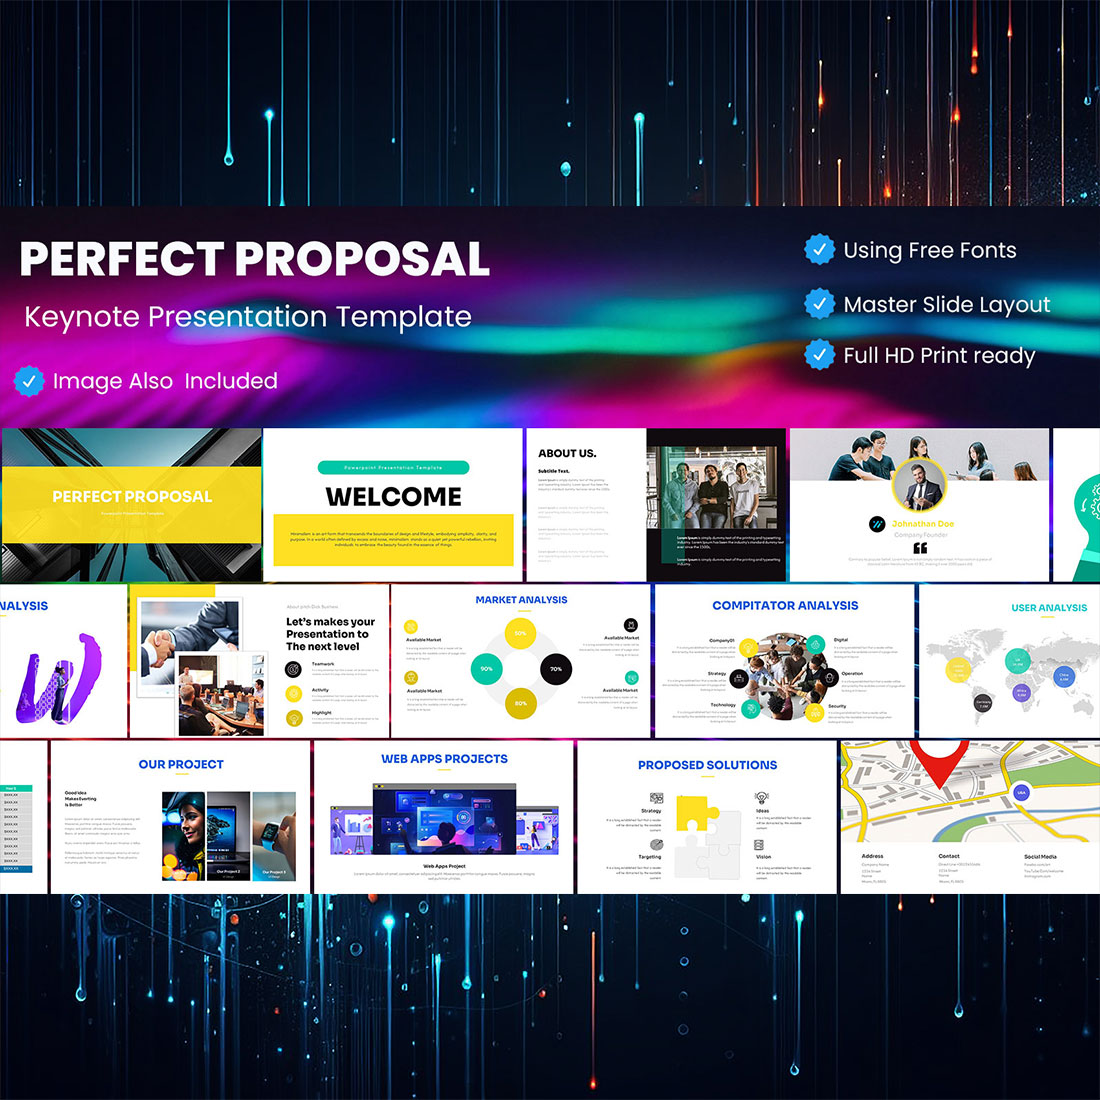 Perfect Proposal Keynote Presentation Template cover image.